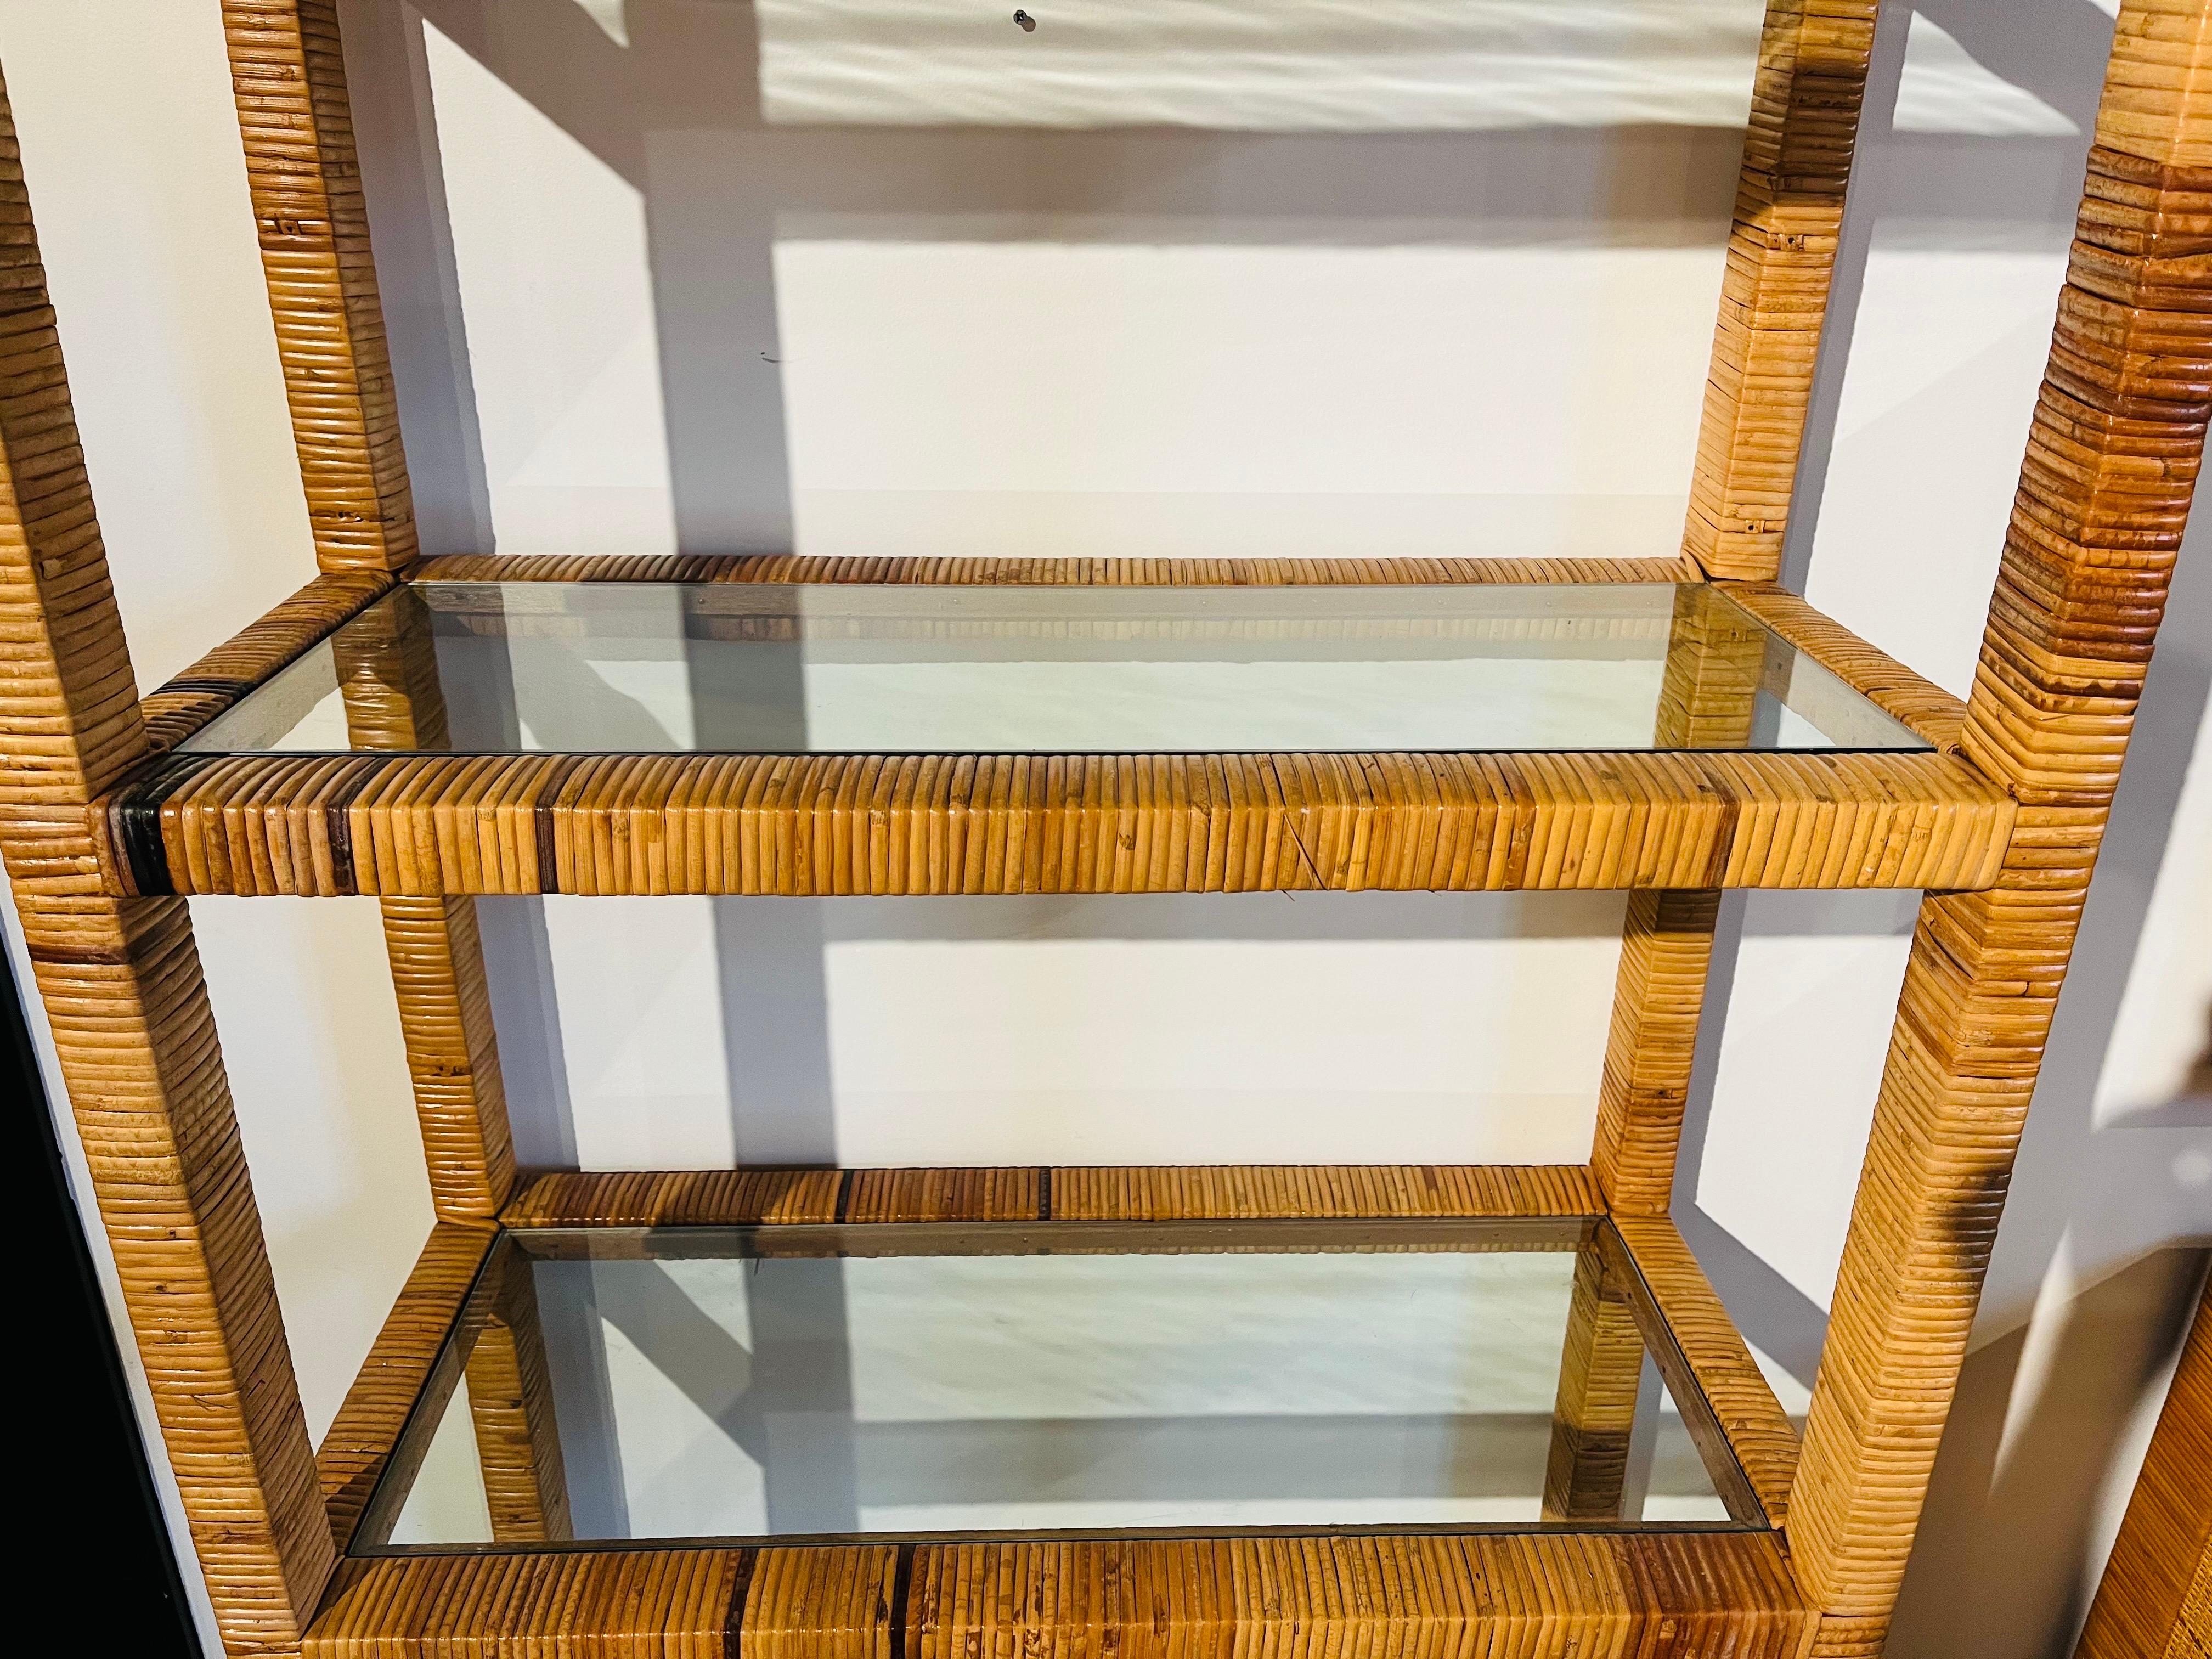 Hollywood Regency Bielecky Style Vintage Four Shelf Wrapped Rattan Etagere with Glass Shelving